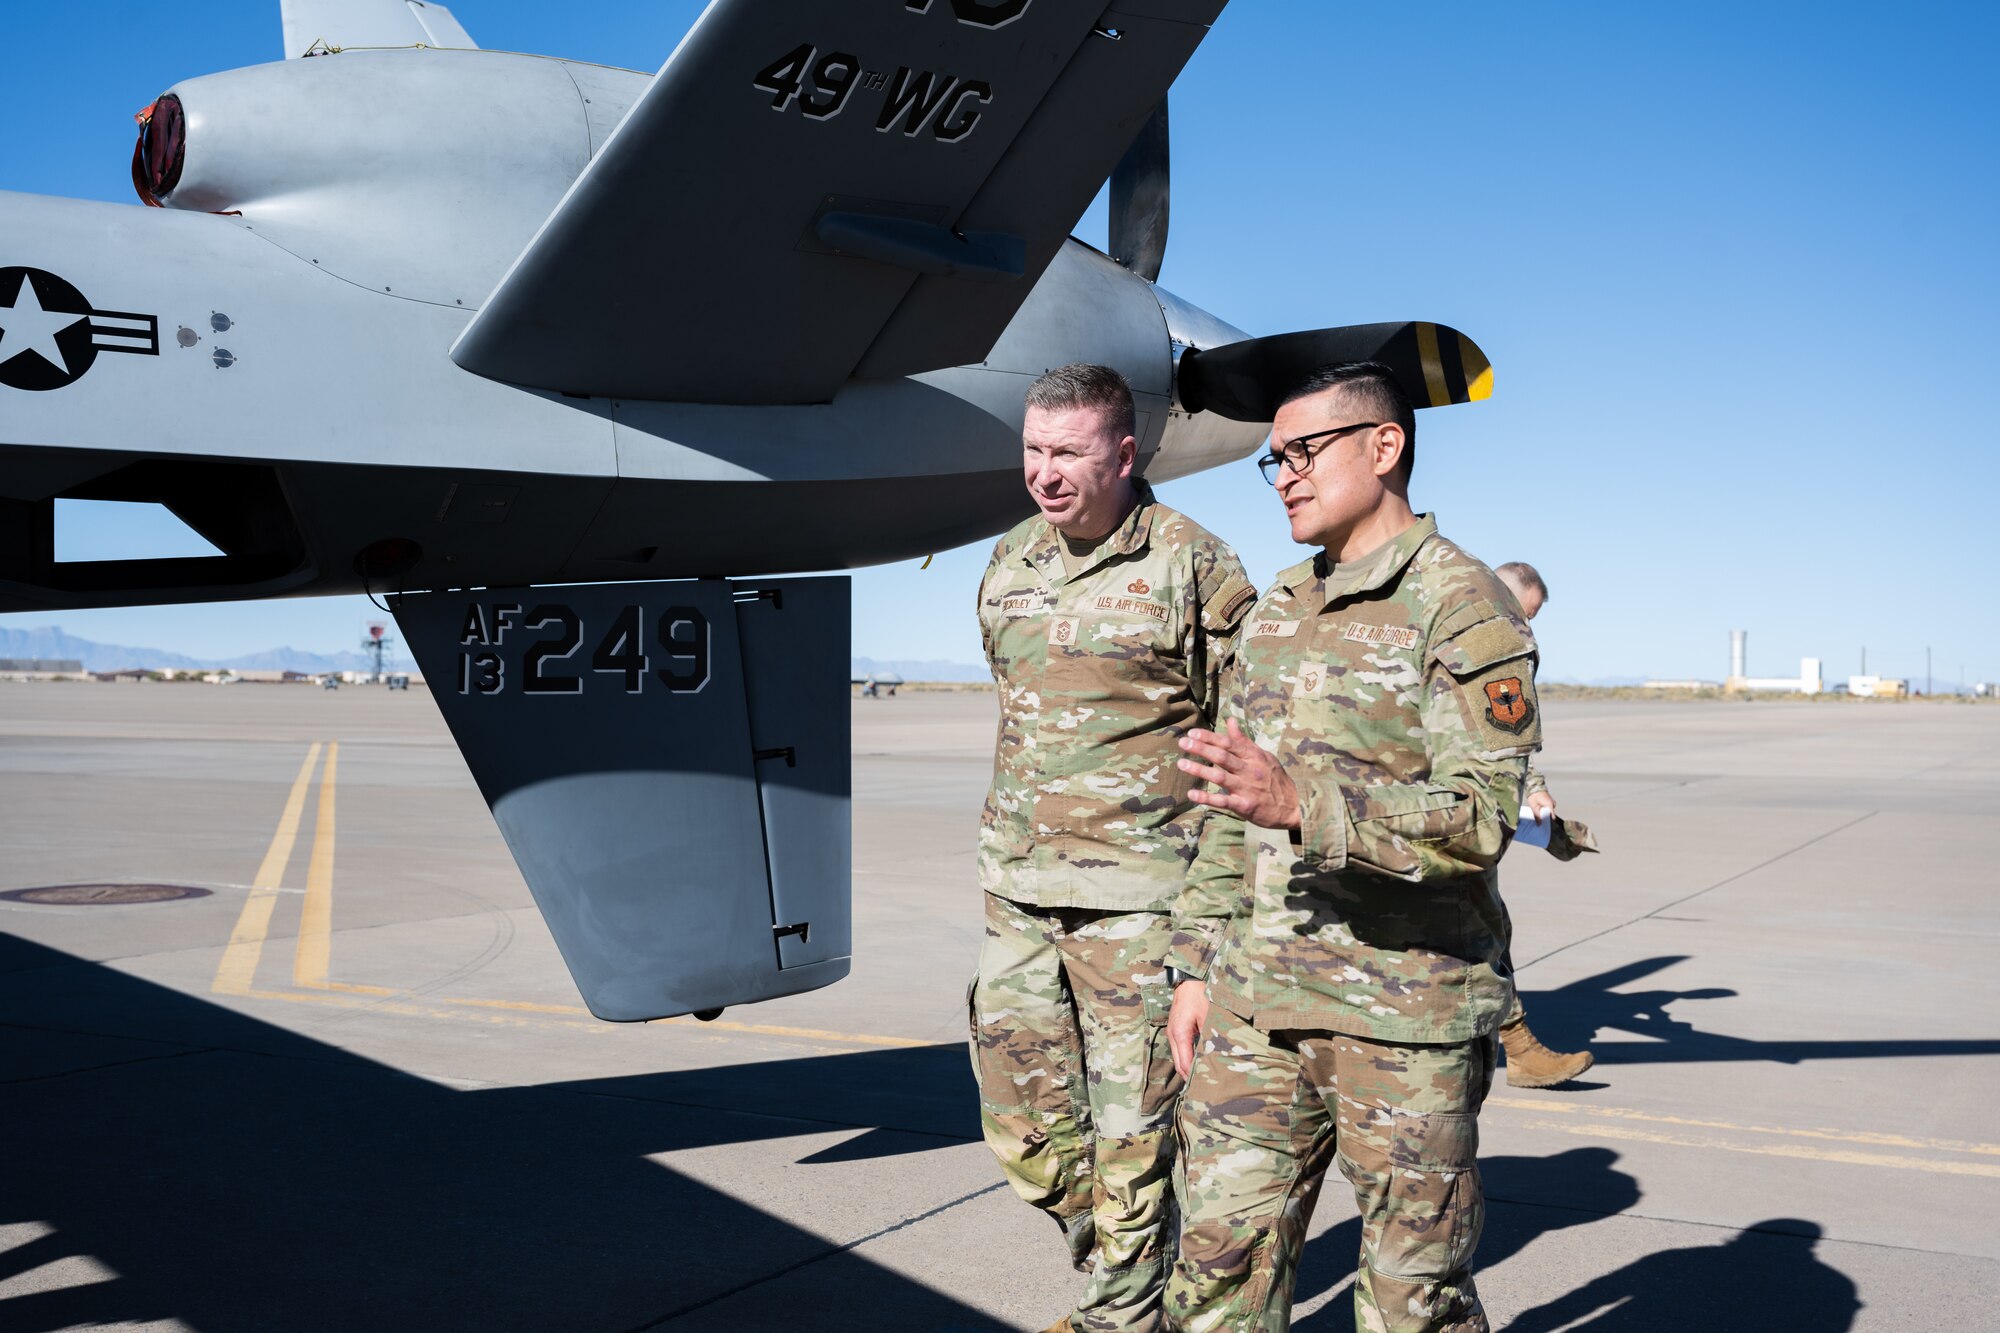 U.S. Air Force Chief Master Sgt. Chad Bickley, command chief of Air Education and Training Command, left, and U.S. Air Force Master Sgt. Michael Pena, 49th Aircraft Maintenance Squadron MQ-9 Reaper production superintendent, discuss the maintenance requirements for an MQ-9 at Holloman Air Force Base, New Mexico, Nov. 8, 2023. The Fightin’ 49ers demonstrated their innovative approach to problem solving to the top enlisted Airman in AETC, showcasing the critical role that the 49th Wing plays in the broader scope of national defense. (U.S. Air Force photo by Senior Airman Antonio Salfran)